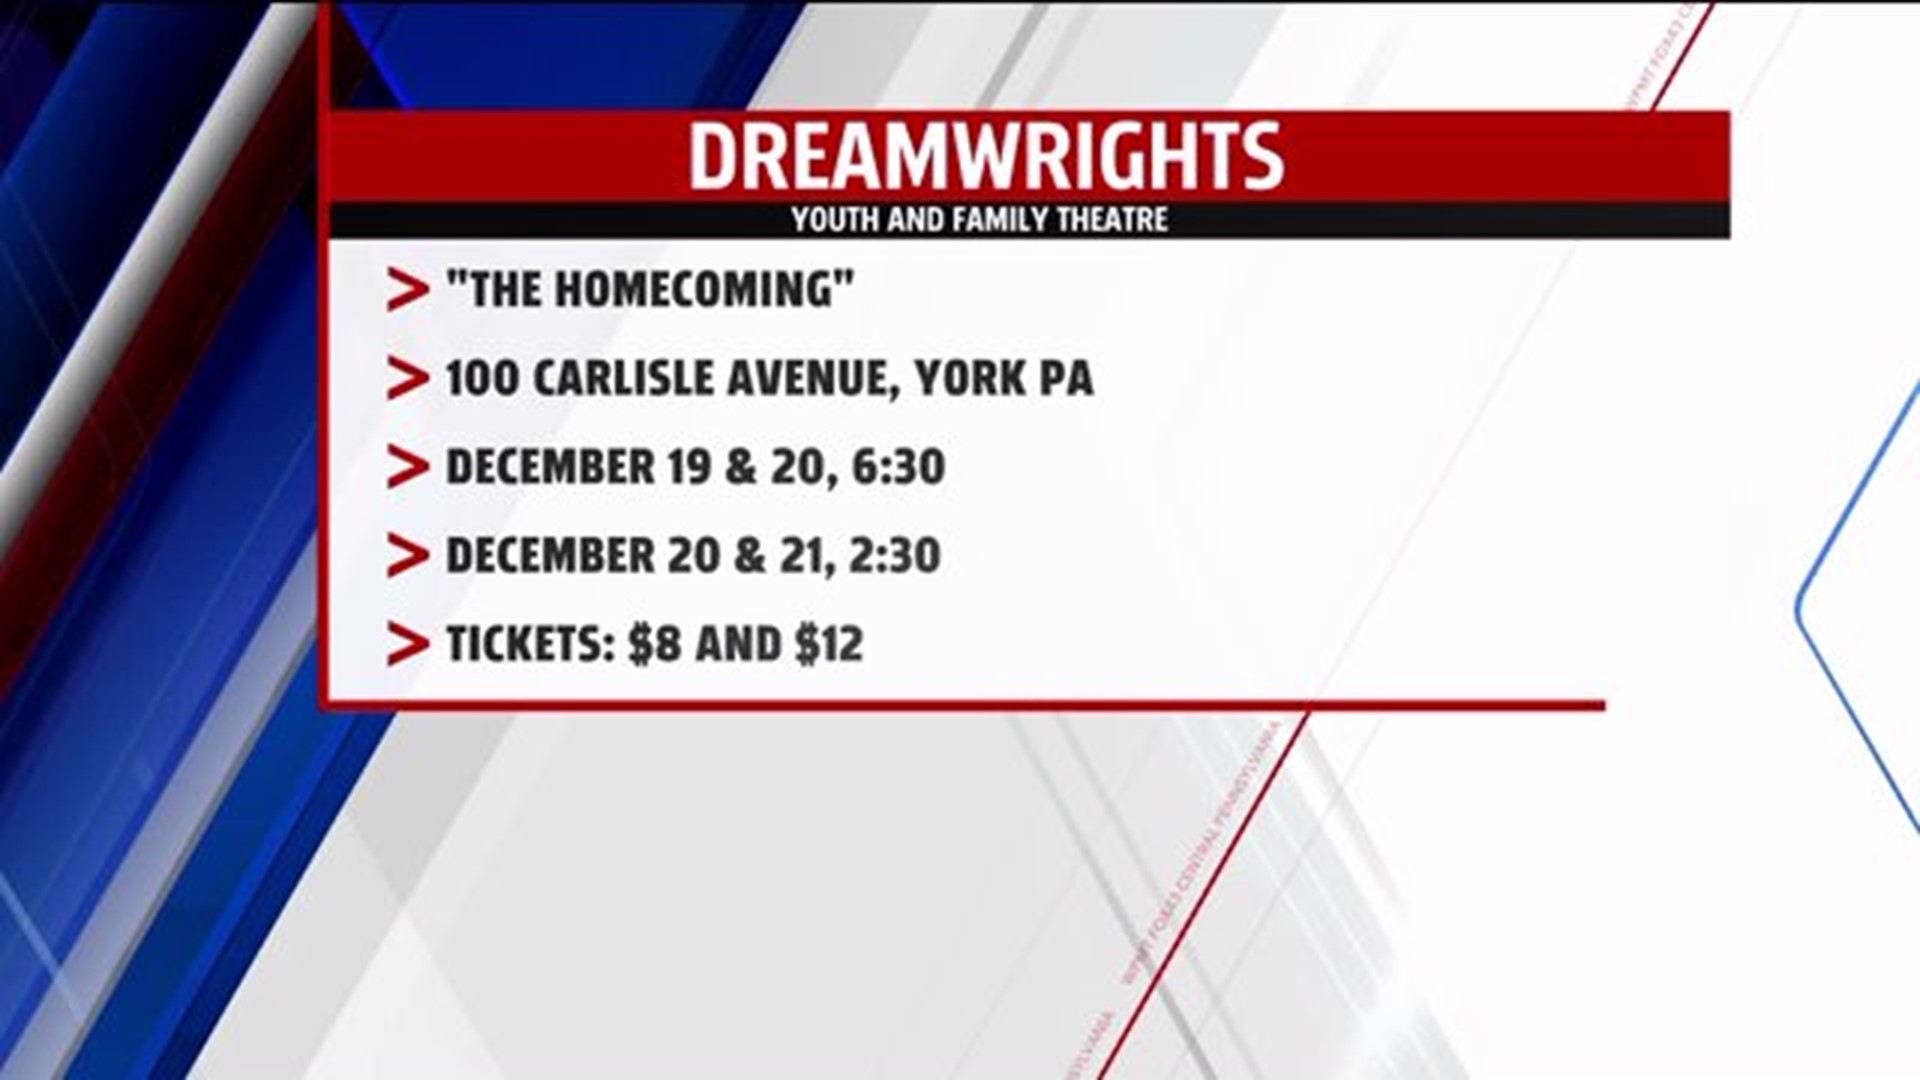 Dreamwrights Youth and Family Theatre: "The Homecoming"